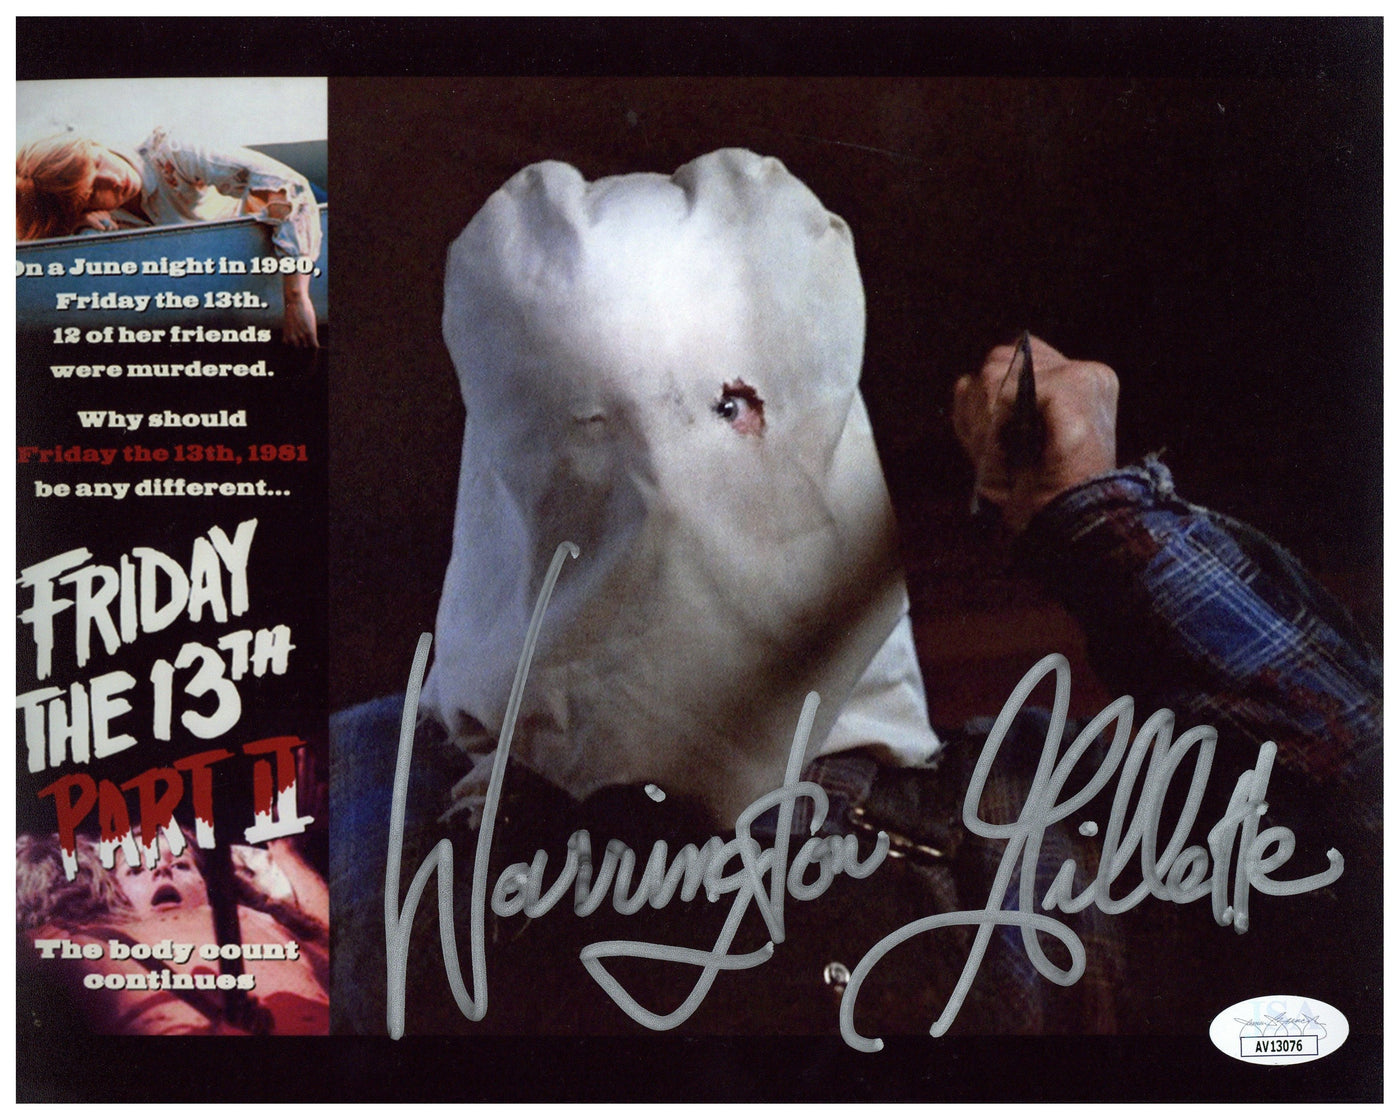 Warrington Gillette Signed 8x10 Photo Friday the 13th Jason Voorhees Autographed JSA